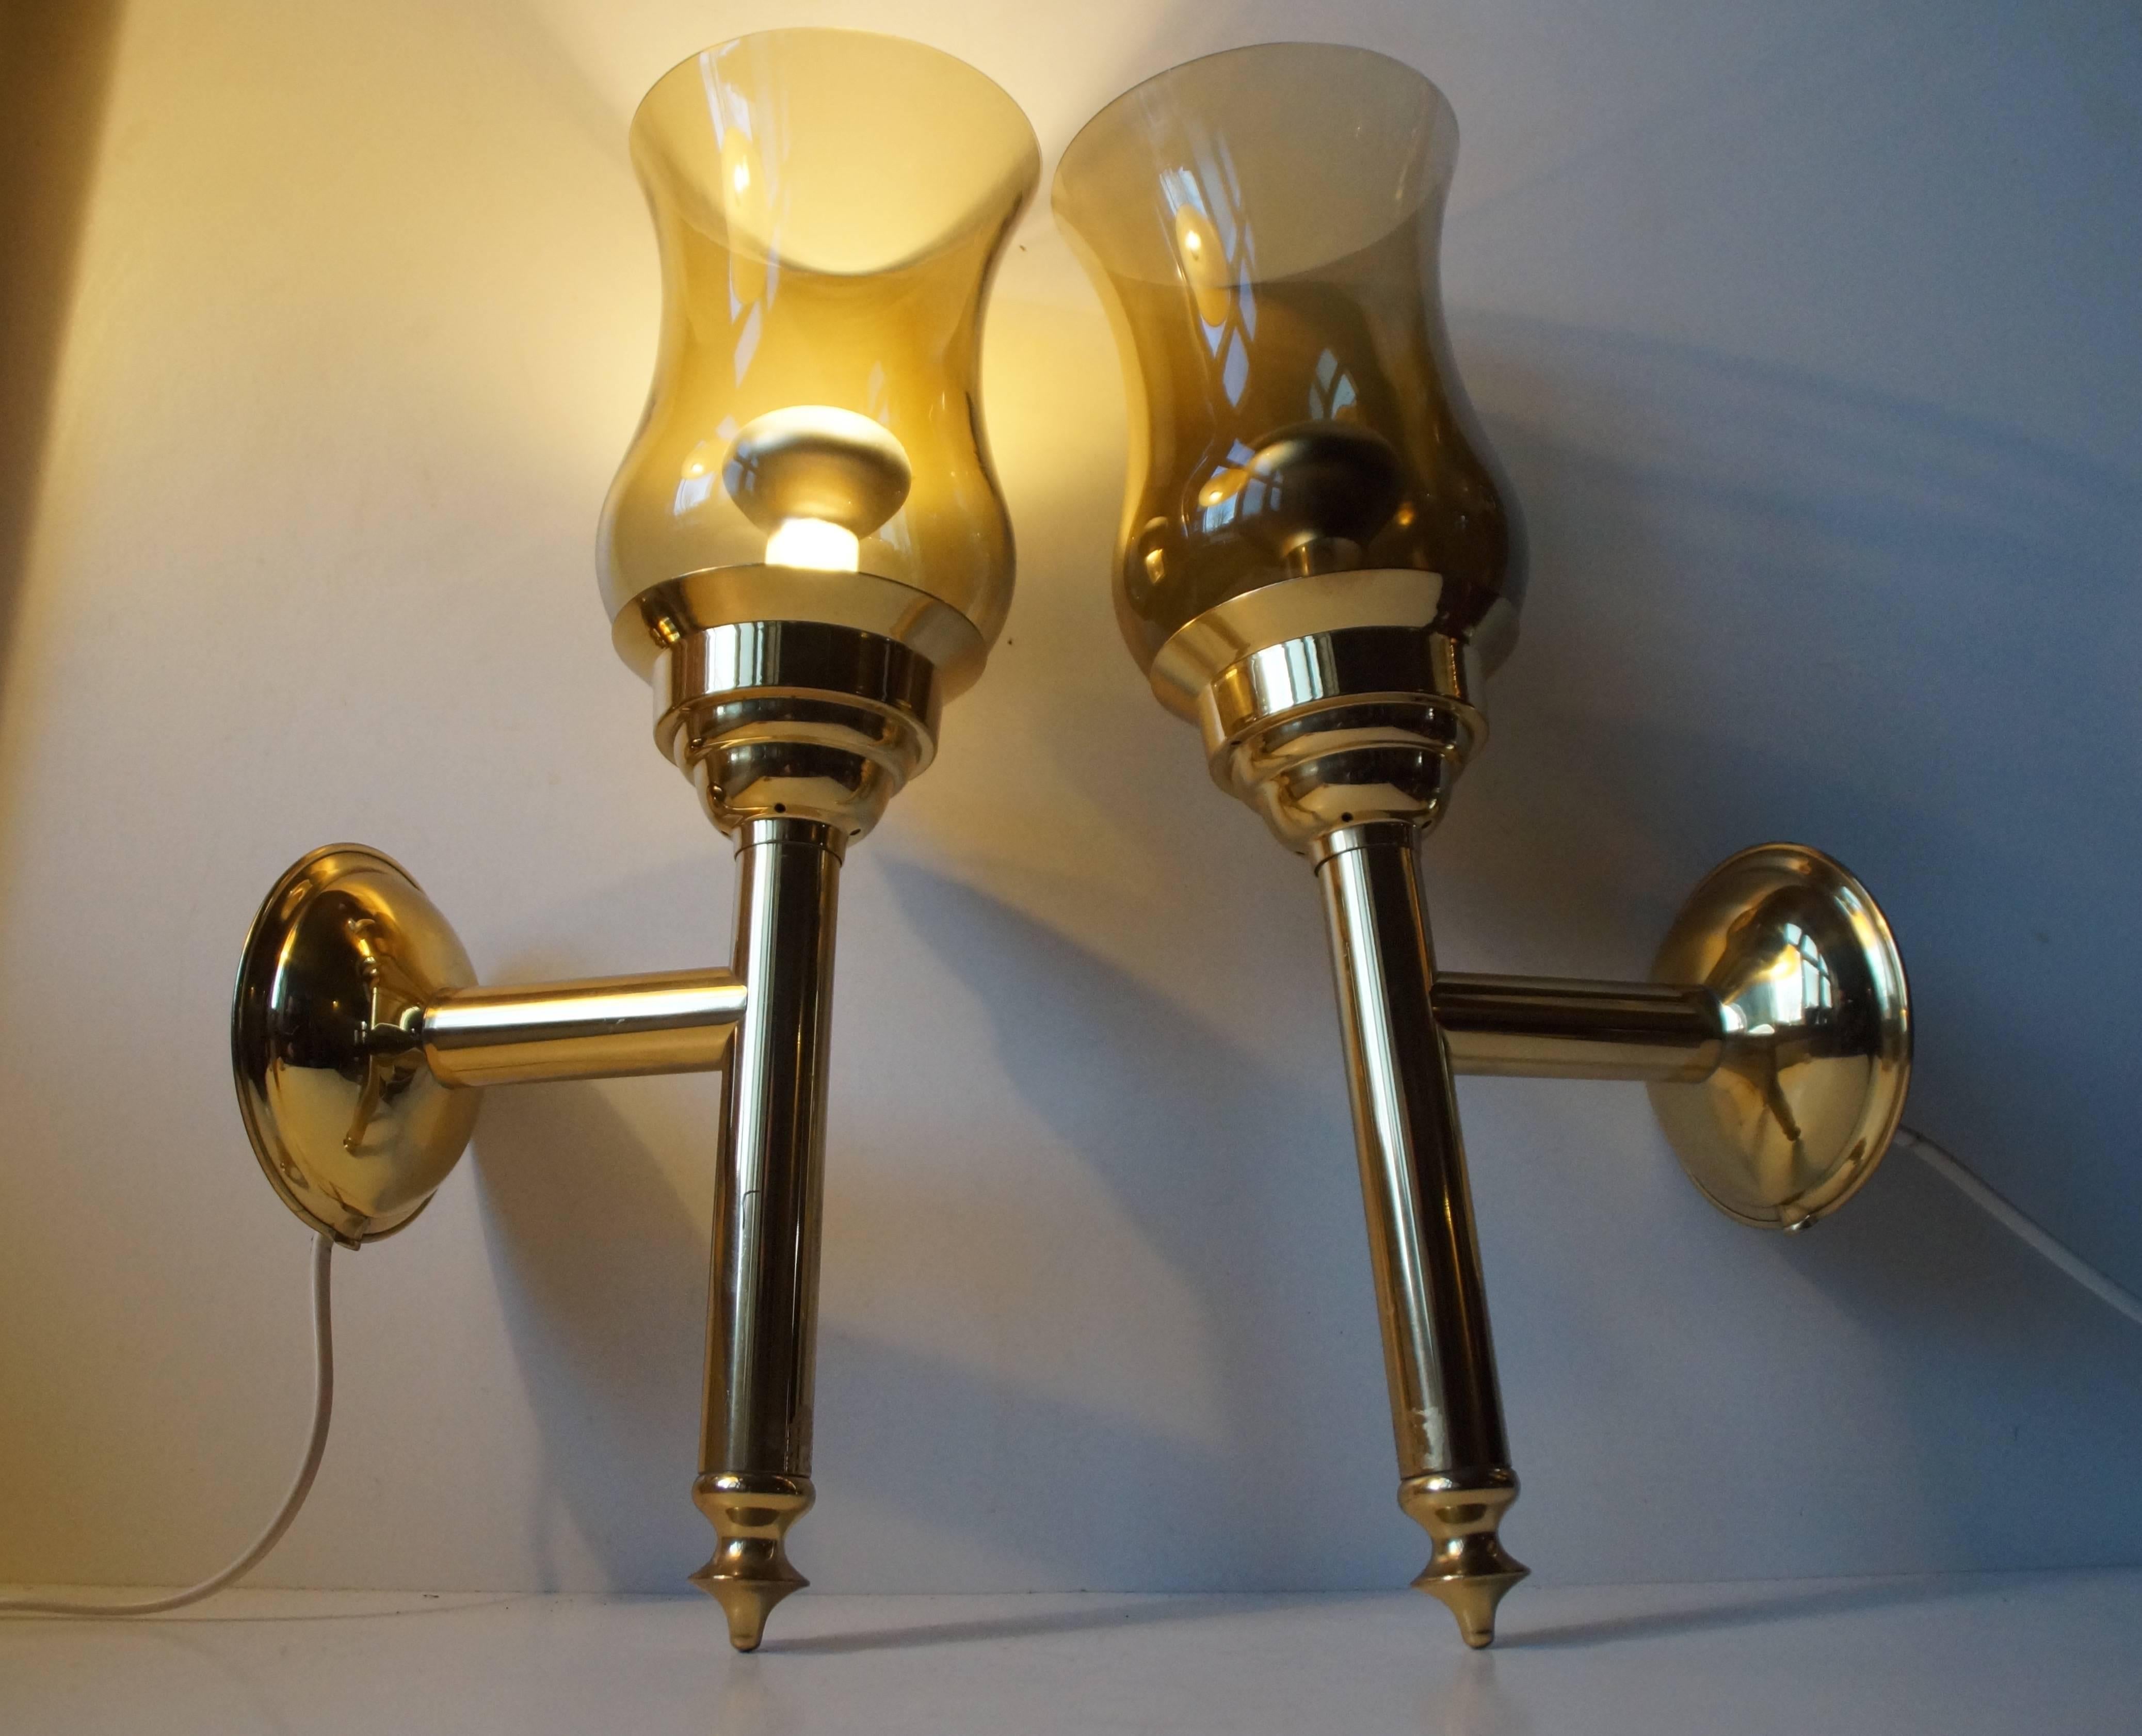 Late 20th Century Scandinavian Modern Torch Wall Sconces in Brass and Smoke Glass For Sale